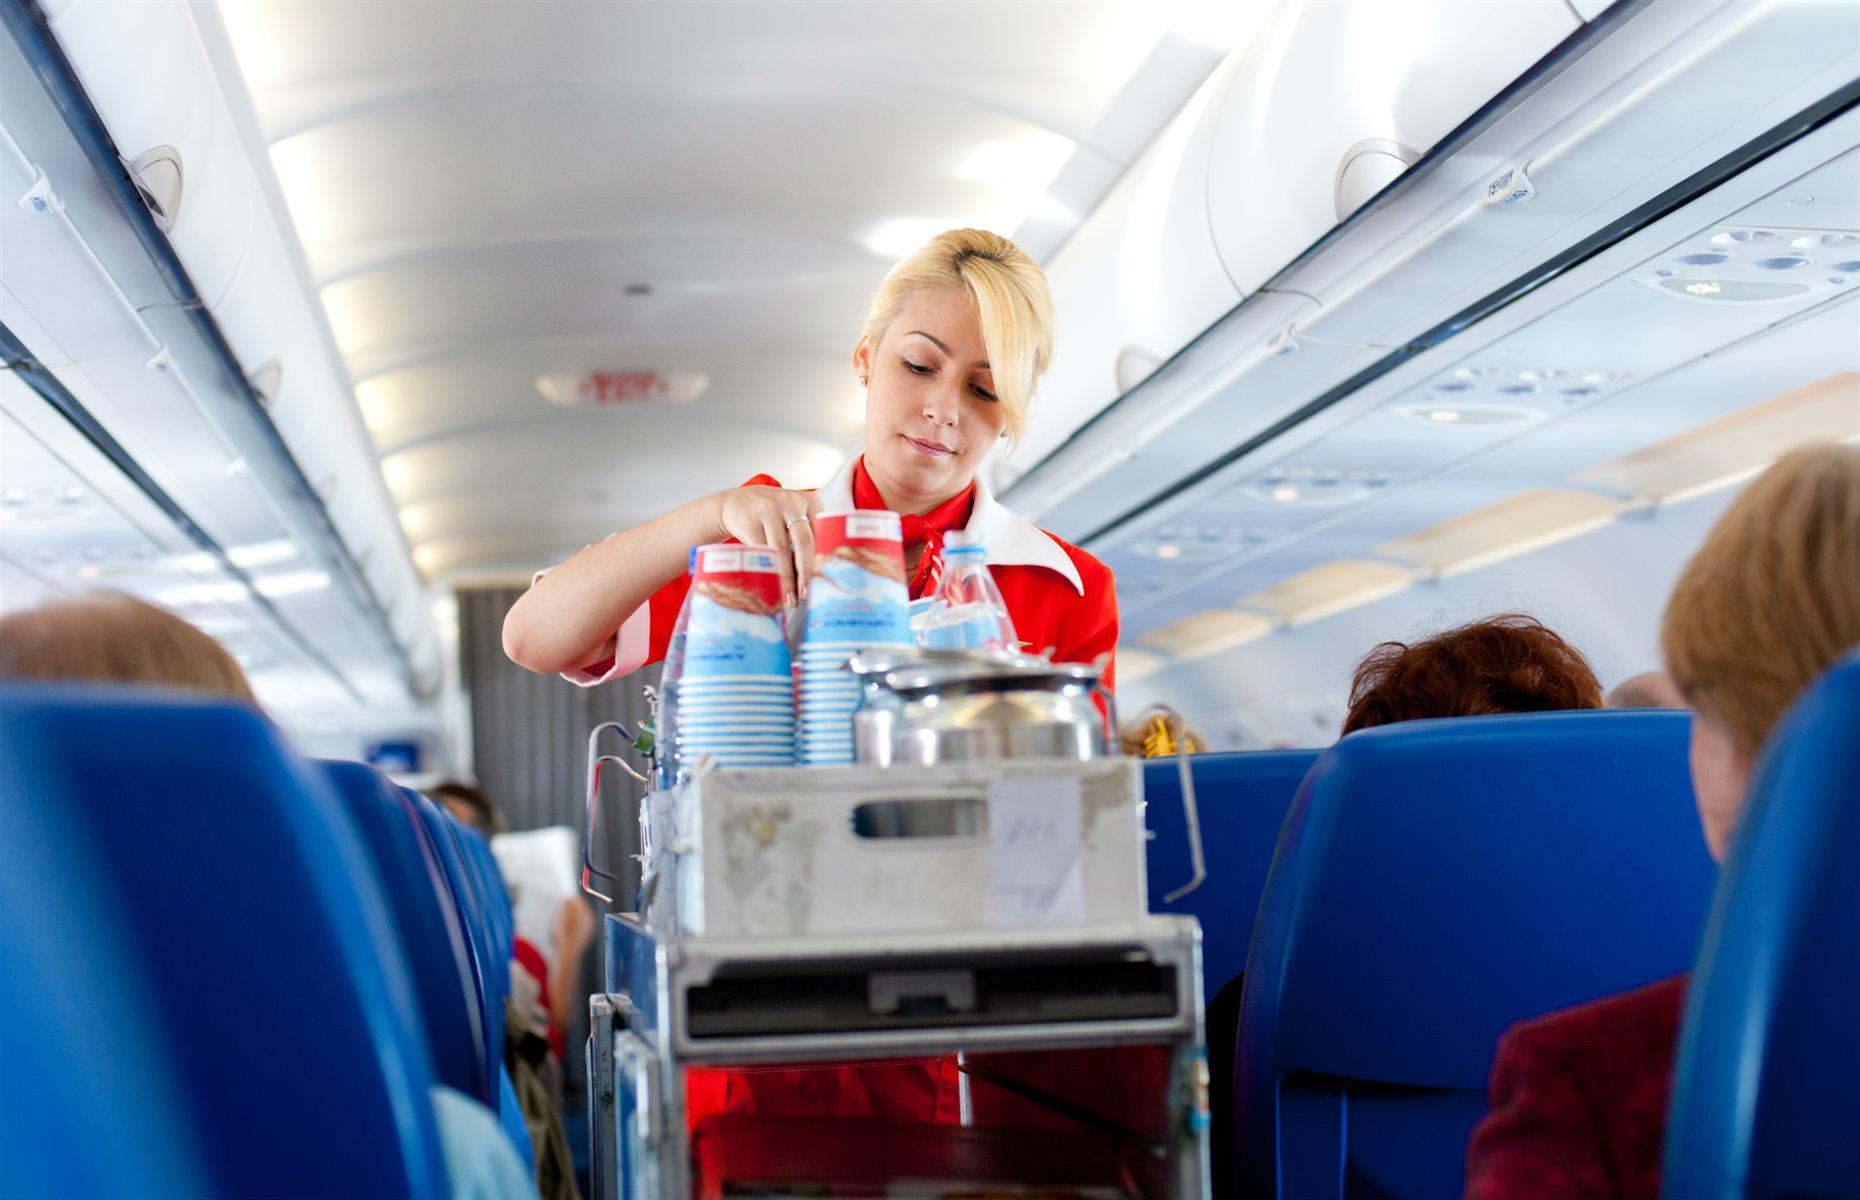 <p>Some airlines give you wine and spirits in bottles rather than pouring them straight into your glass. Many travelers will save a bottle or two for later, and that's perfectly fine – just ask the flight attendant, rather than trying to grab anything from the trolley.</p>